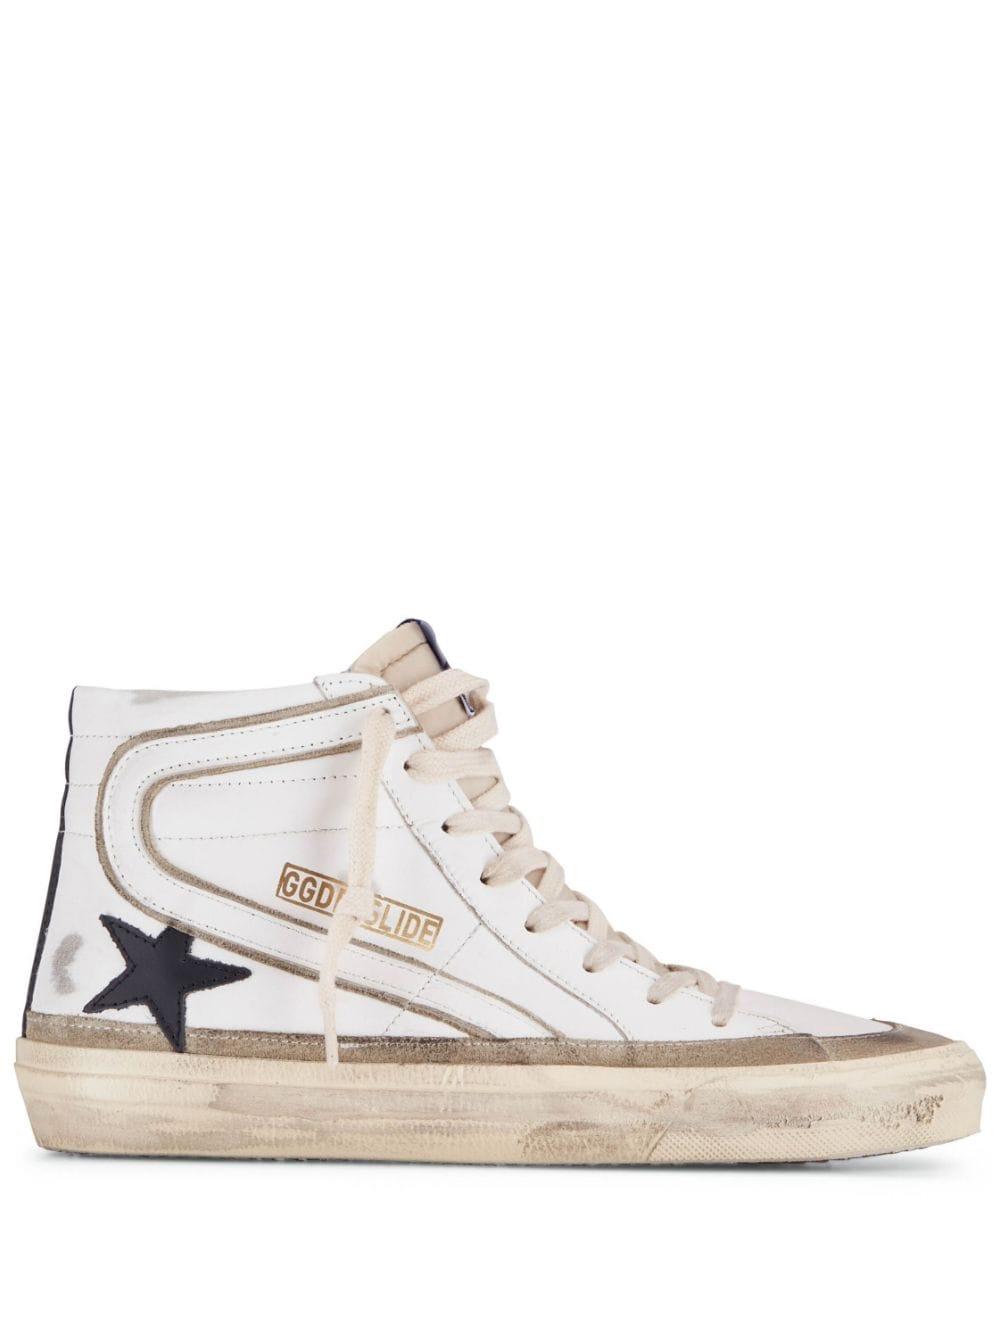 Golden Goose Slide High-top Sneakers in White | Lyst